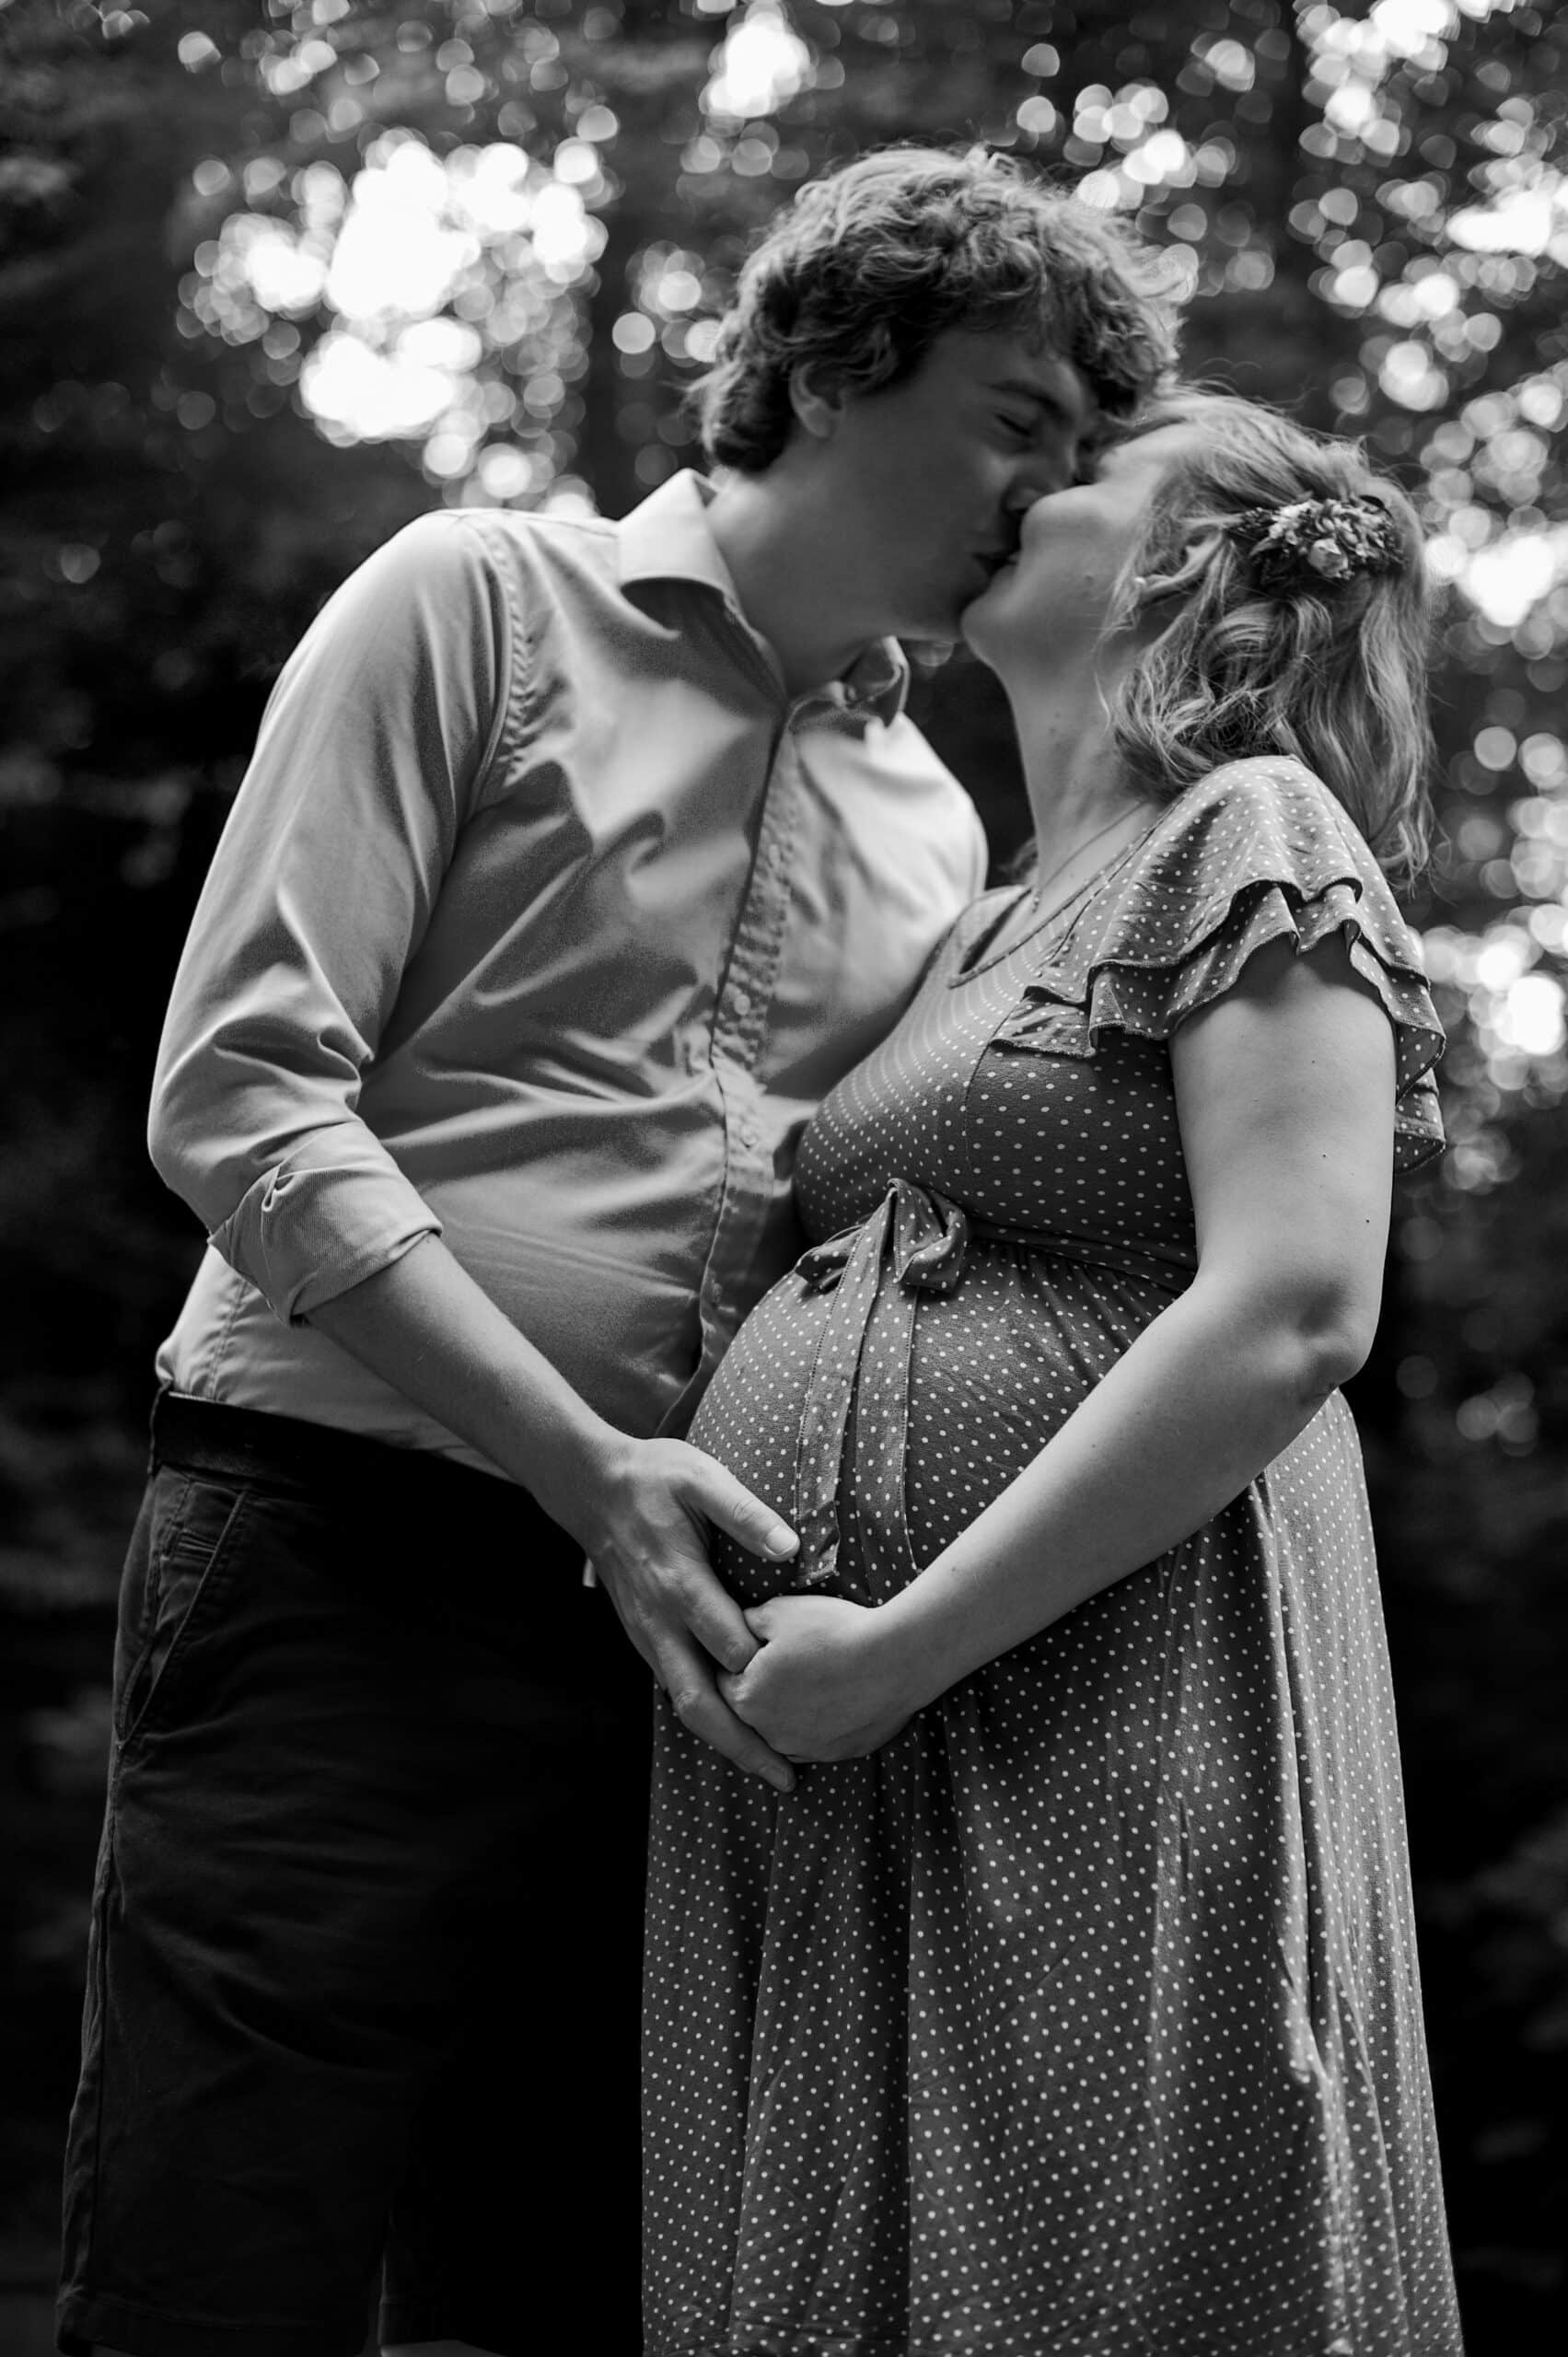 Why I Love Outdoor Maternity Photos - Kirstin Witney Photography: